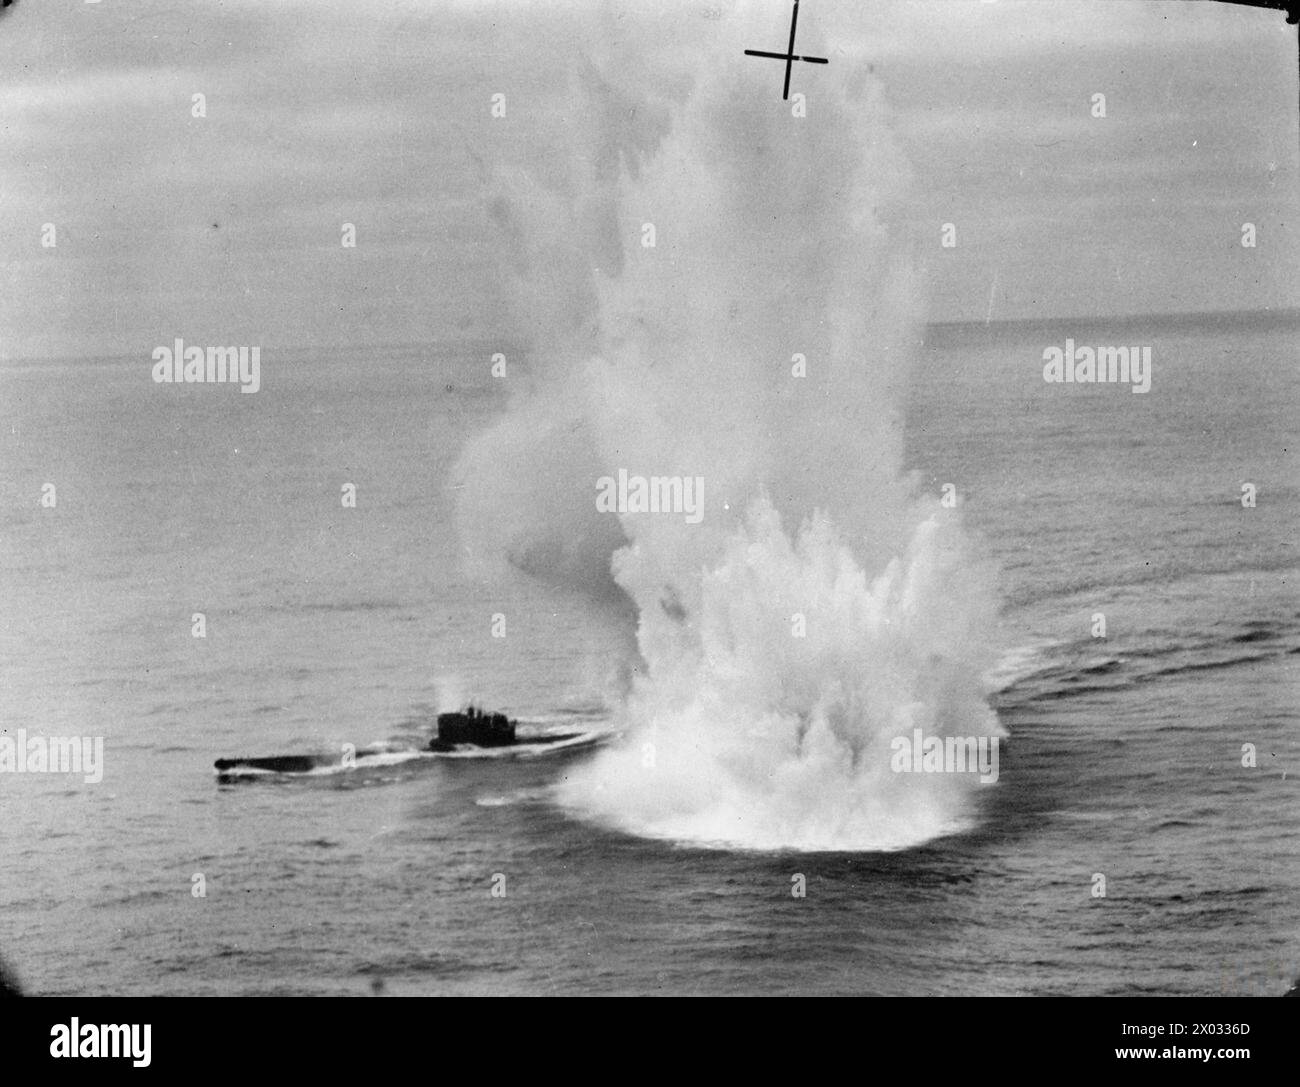 ROYAL AIR FORCE COASTAL COMMAND, 1939-1945. - Low-level oblique photograph taken from Short Sunderland Mark III, EK591 'U', of No. 422 Squadron RCAF while attacking German type VIIC submarine U-625 in the Atlantic Ocean. Depth charges dropped by EK591 explode around the stern of the U-boat (right), while machine-gun fire from the Sunderland's rear gunner straddles the bows and conning tower (left). U-625 submerged shortly after, only to resurface three minutes later in a damaged condition  Royal Canadian Air Force, 422 Squadron, German Navy (Third Reich), U-625 Stock Photo